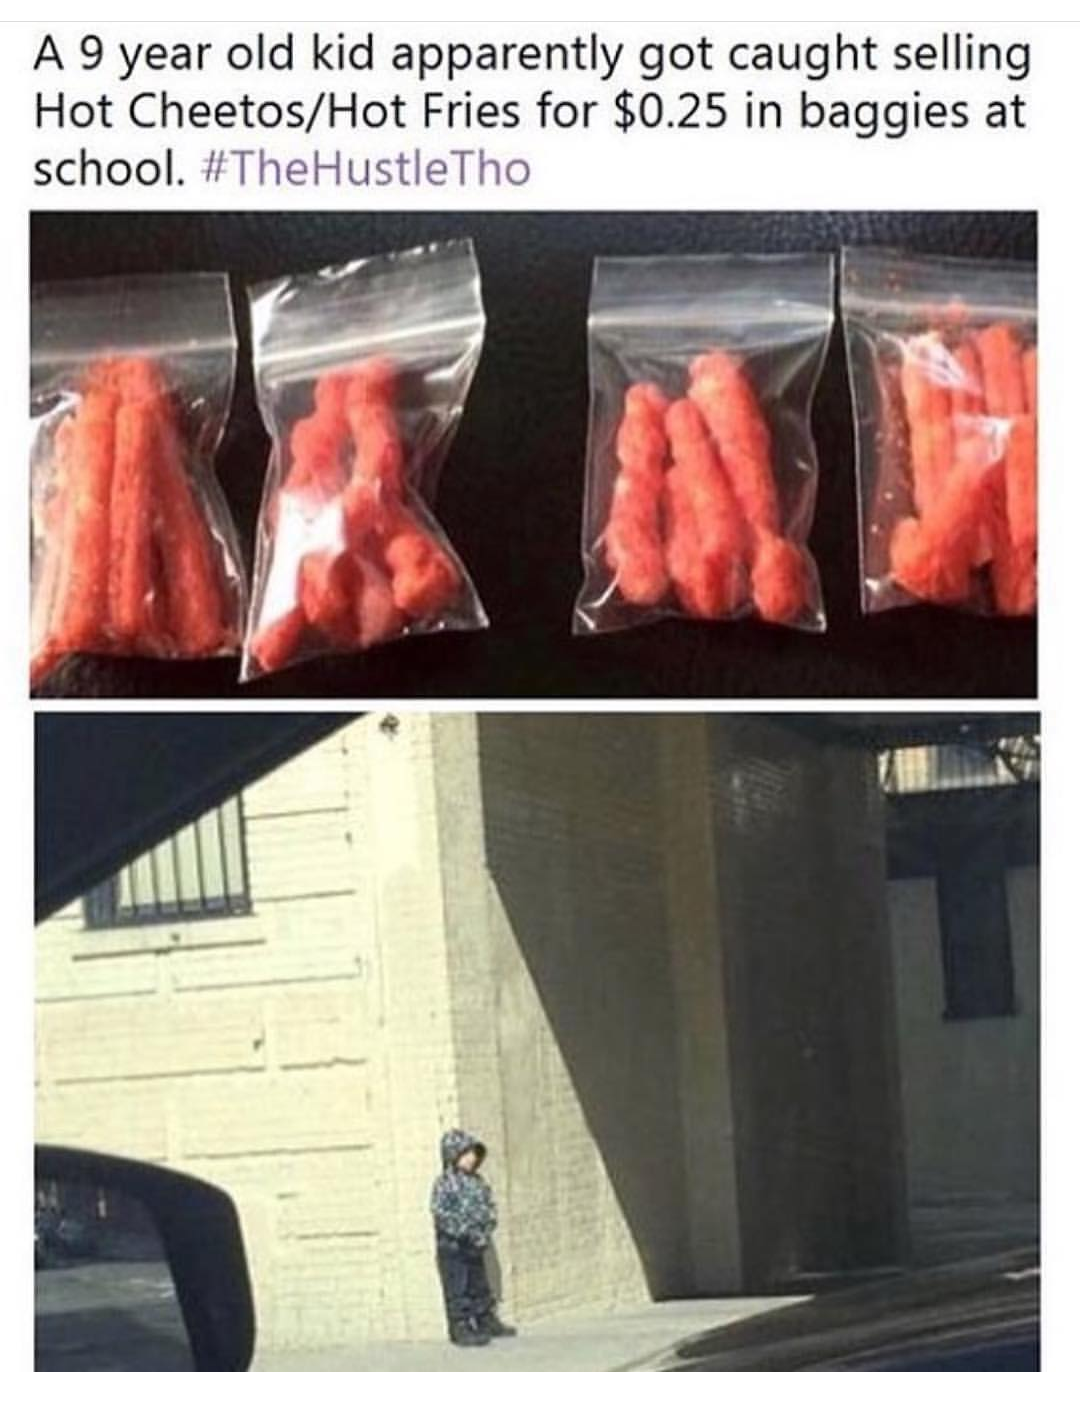 kid selling cheetos at school - A 9 year old kid apparently got caught selling Hot CheetosHot Fries for $0.25 in baggies at school. Tho